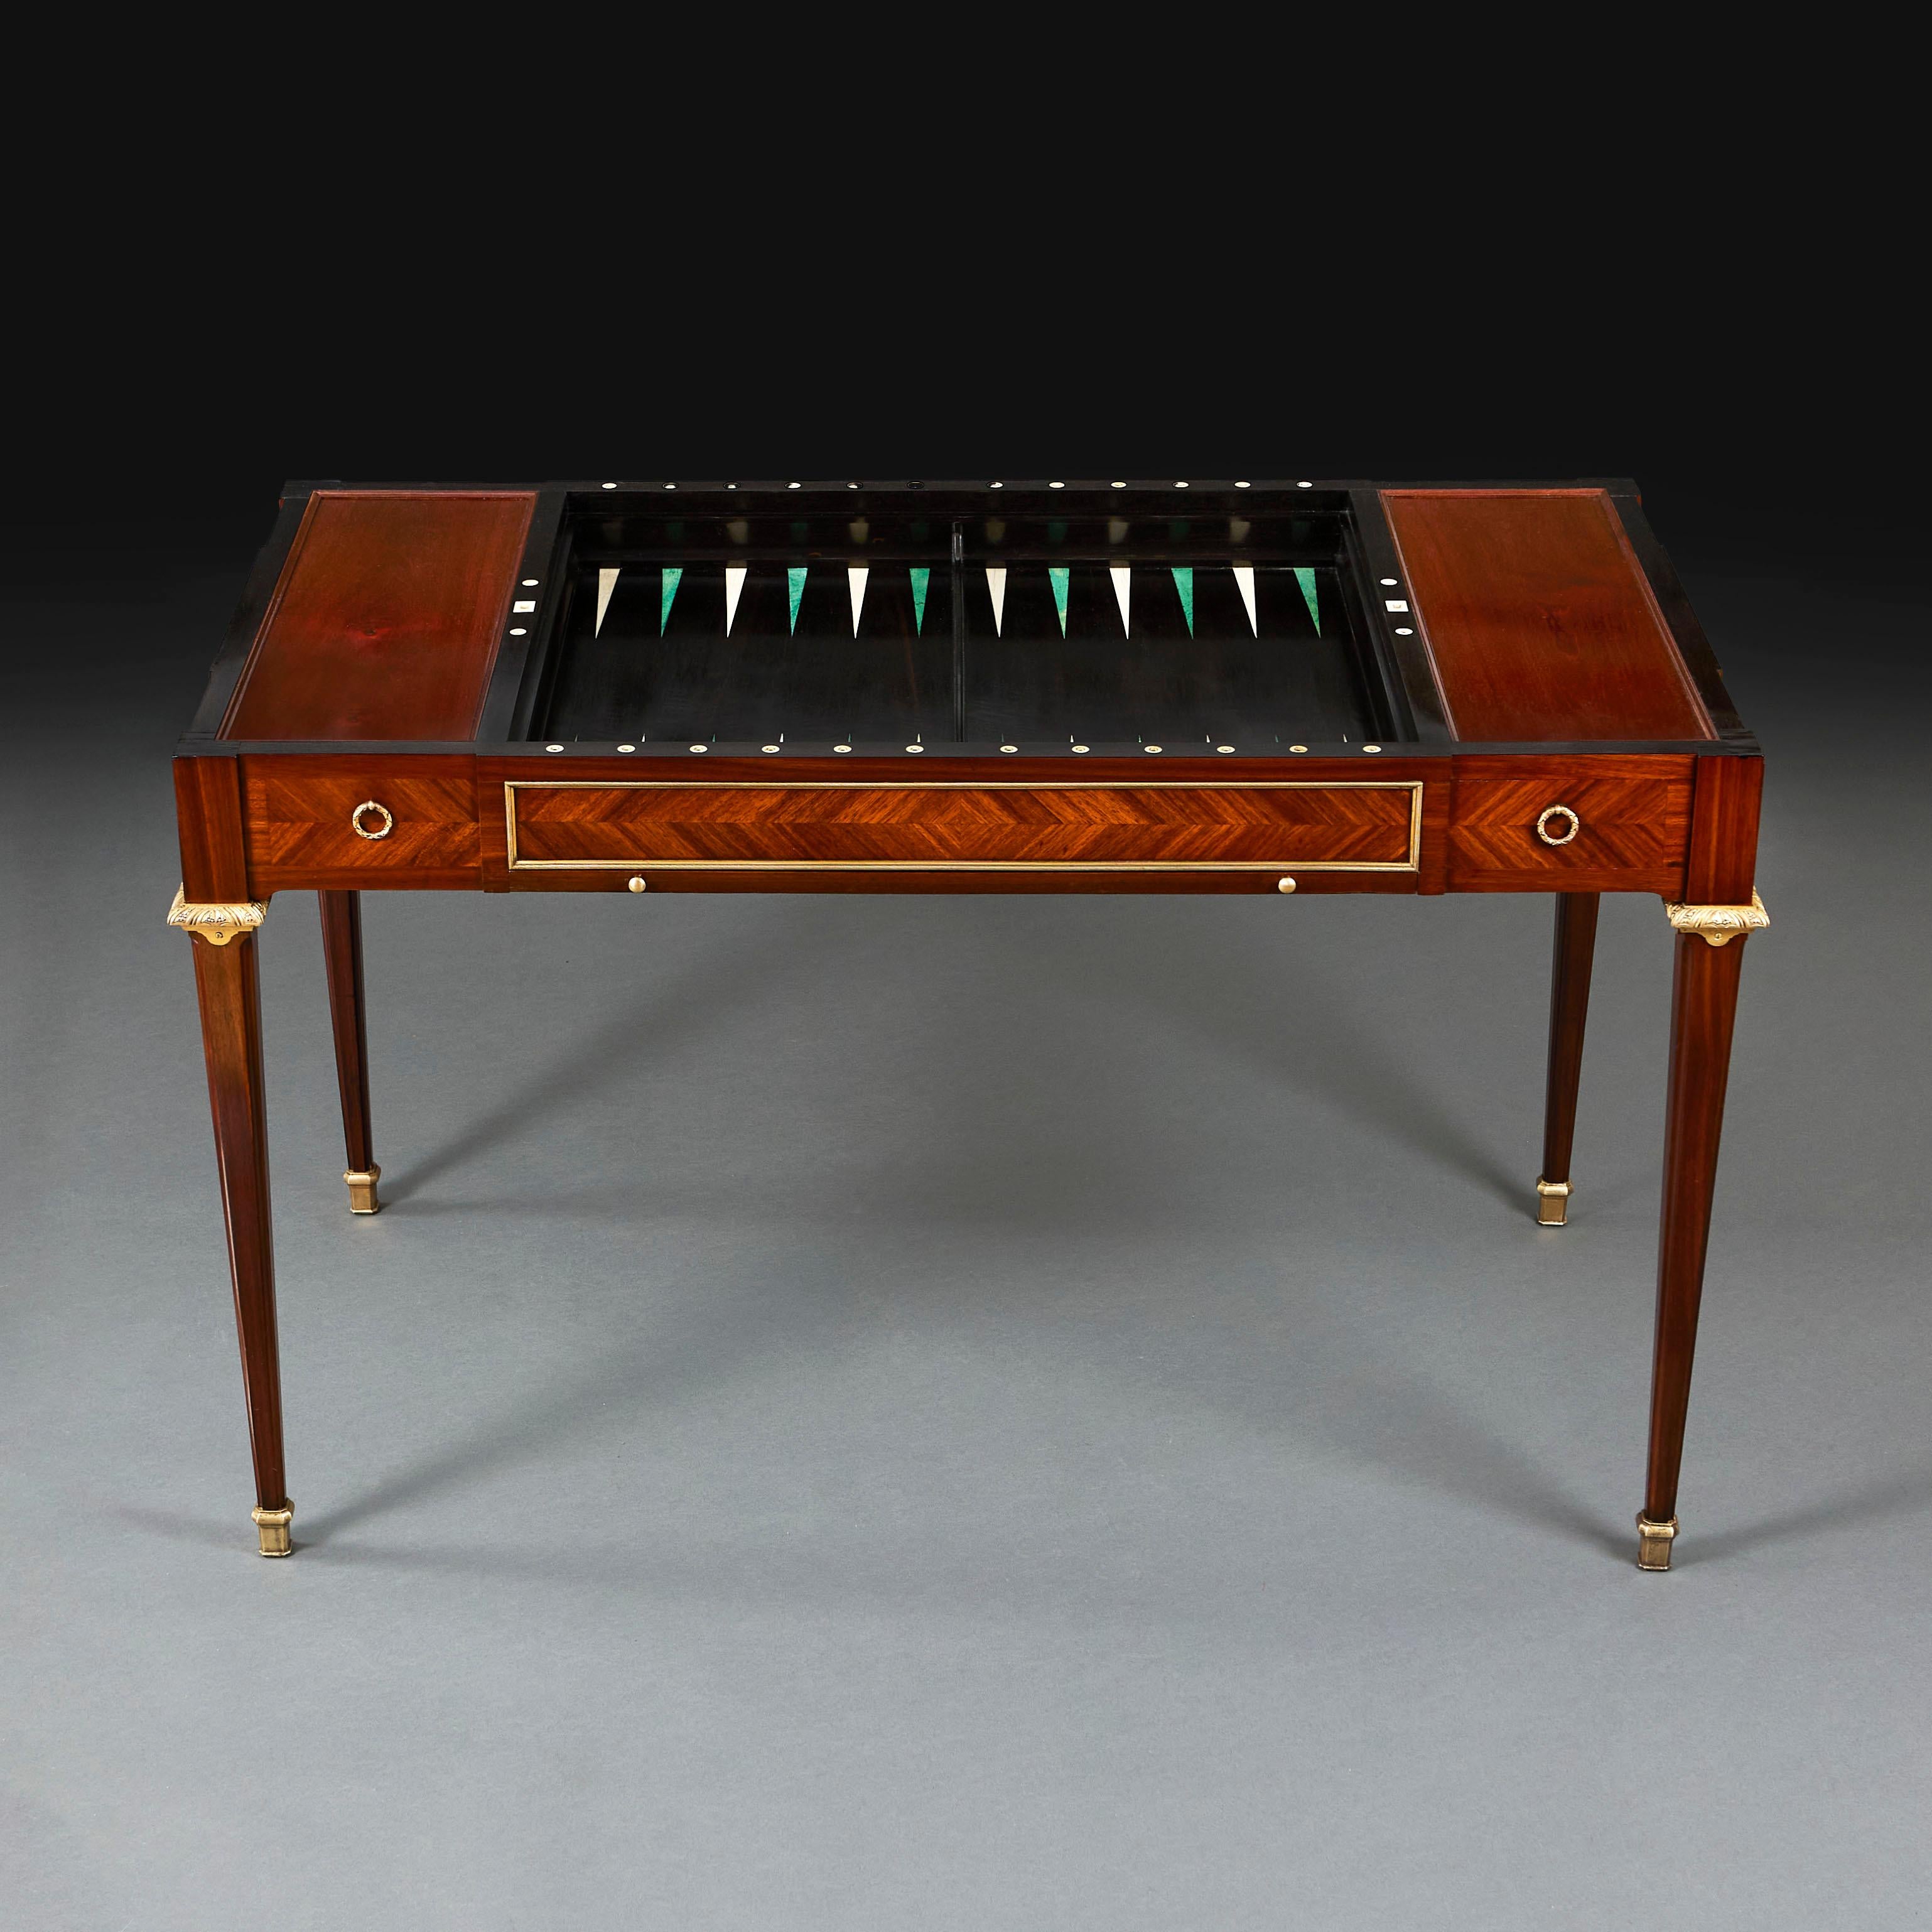 France, circa 1880

Stamped: L. CUENIERES Jne EBENISTE, recorded as having worked in Paris at 10, Rue Ville-Lardouin after 1870.

A fine nineteenth century mahogany tric trac table, with chessboard mounted underneath the ebonised playing surface,